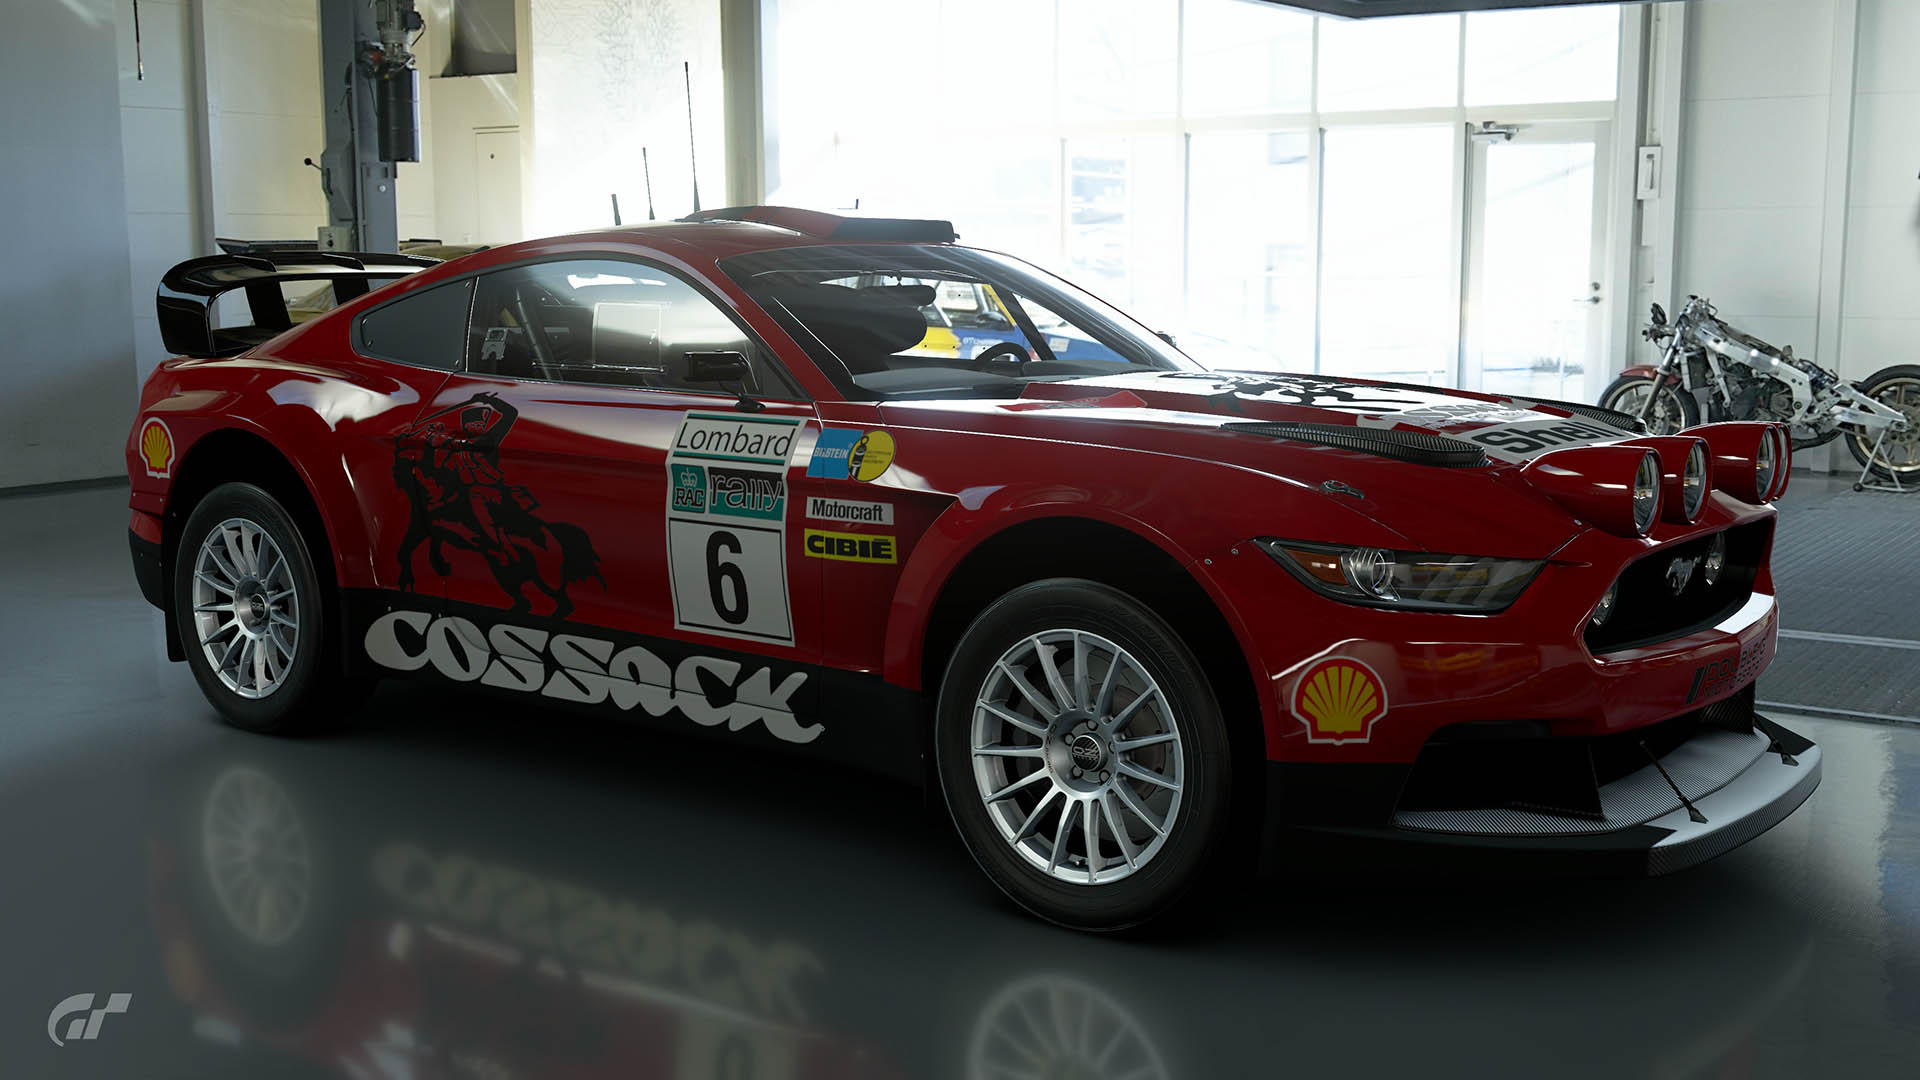 Roger Clark Cossack Ford Mustang Tribute Livery